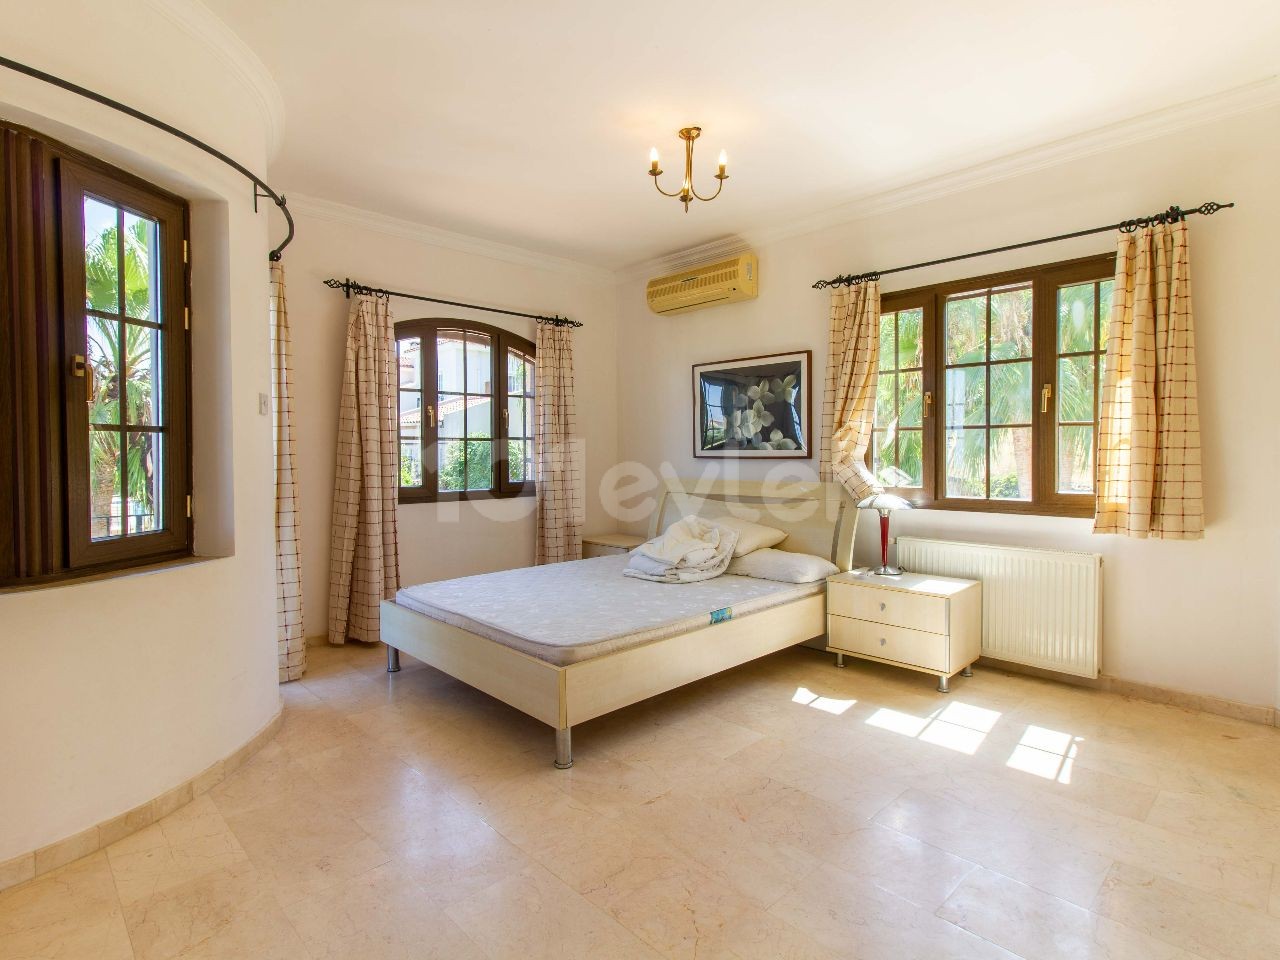 4 bedroom LUXURY villa + 13.7m x 5m pool + fully furnished + marble flooring + central heating + air conditioning + Title deed in the owner’s name, VAT paid